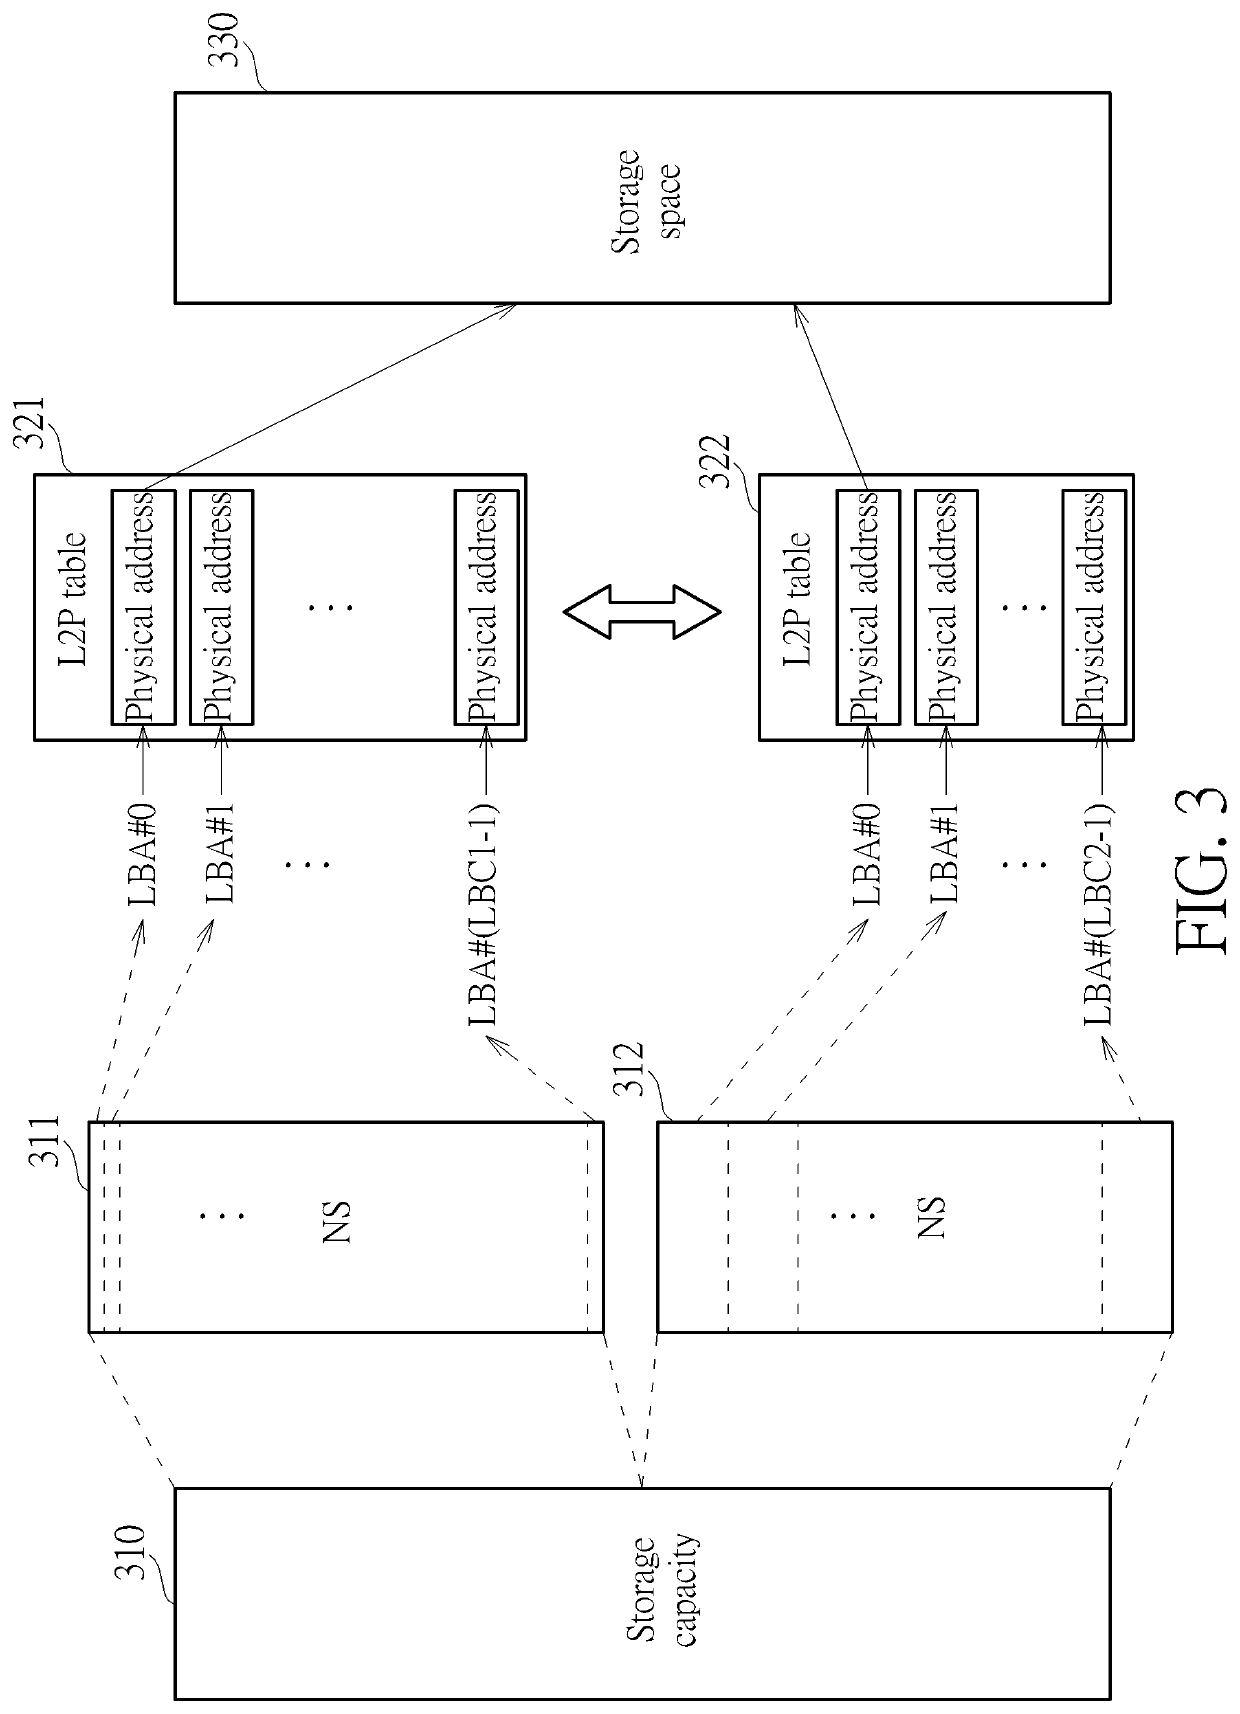 Method for performing storage space management, associated data storage device, and controller thereof